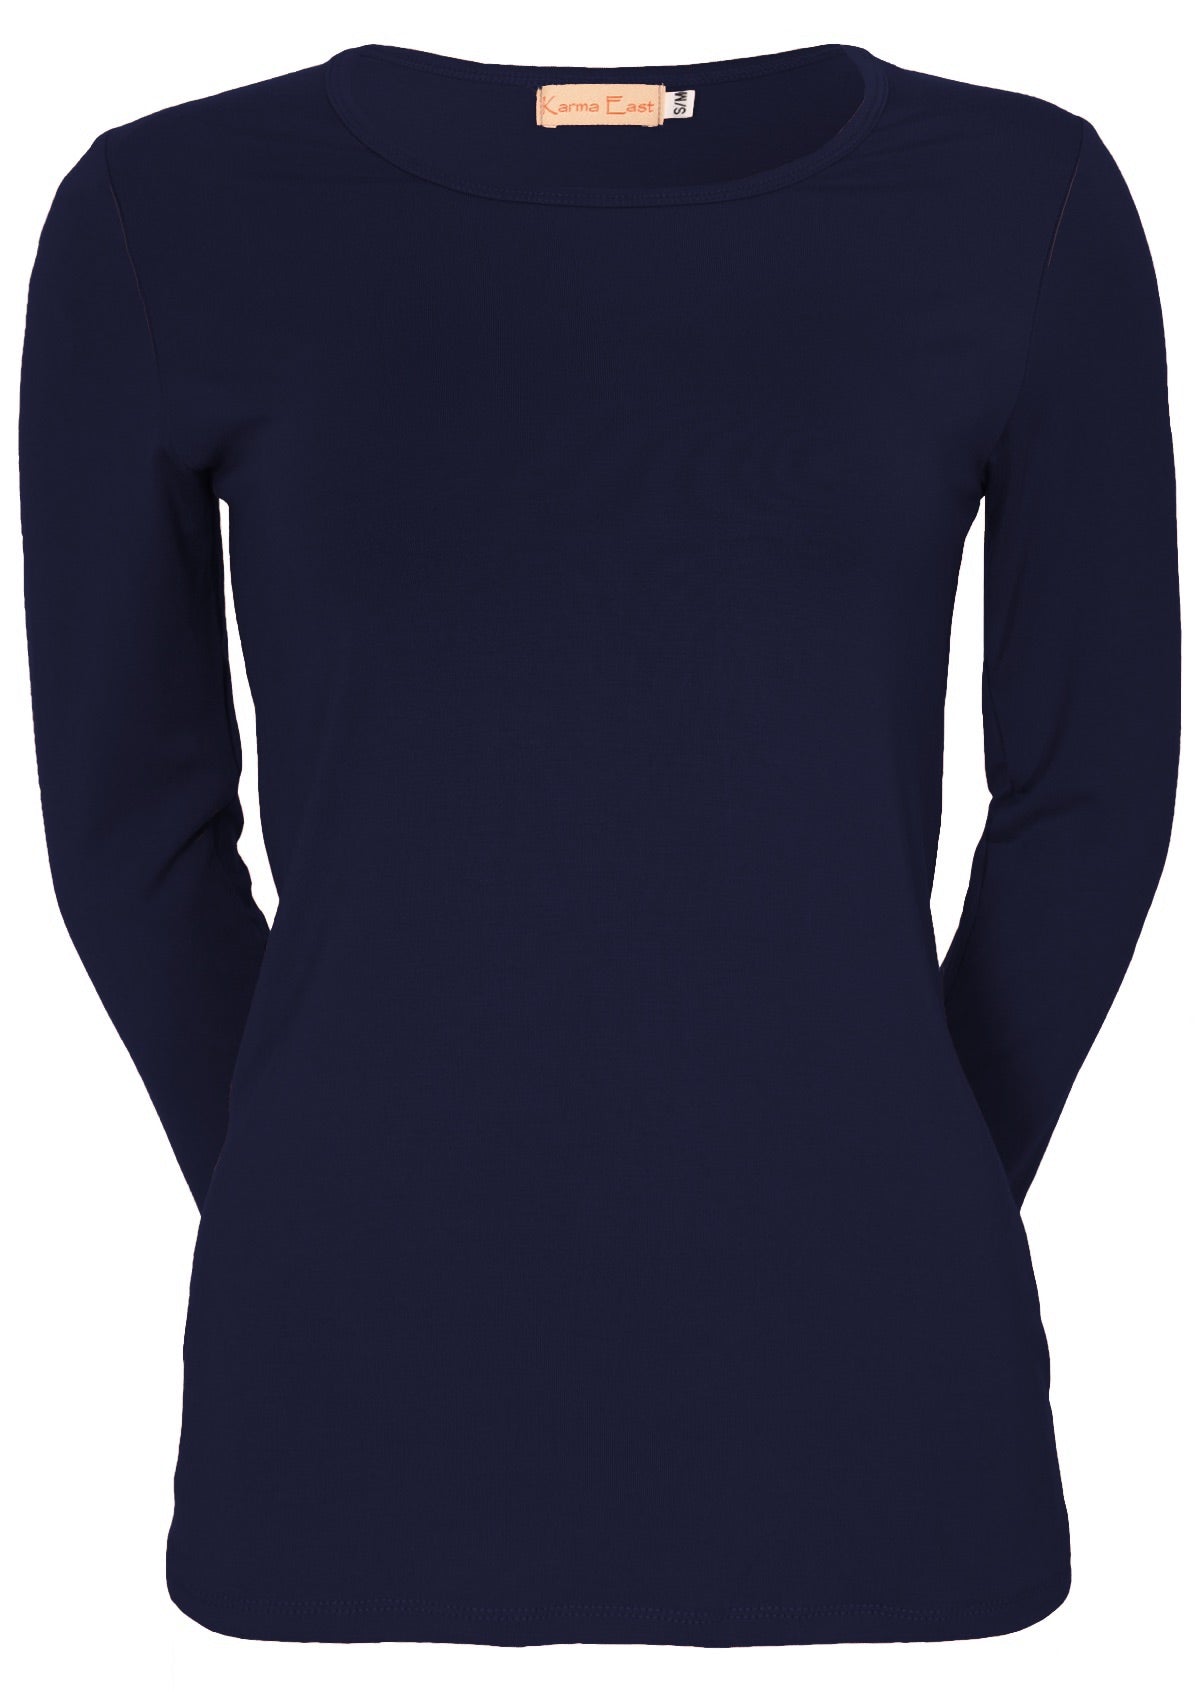 Front view of women's round neck navy blue long sleeve rayon top.